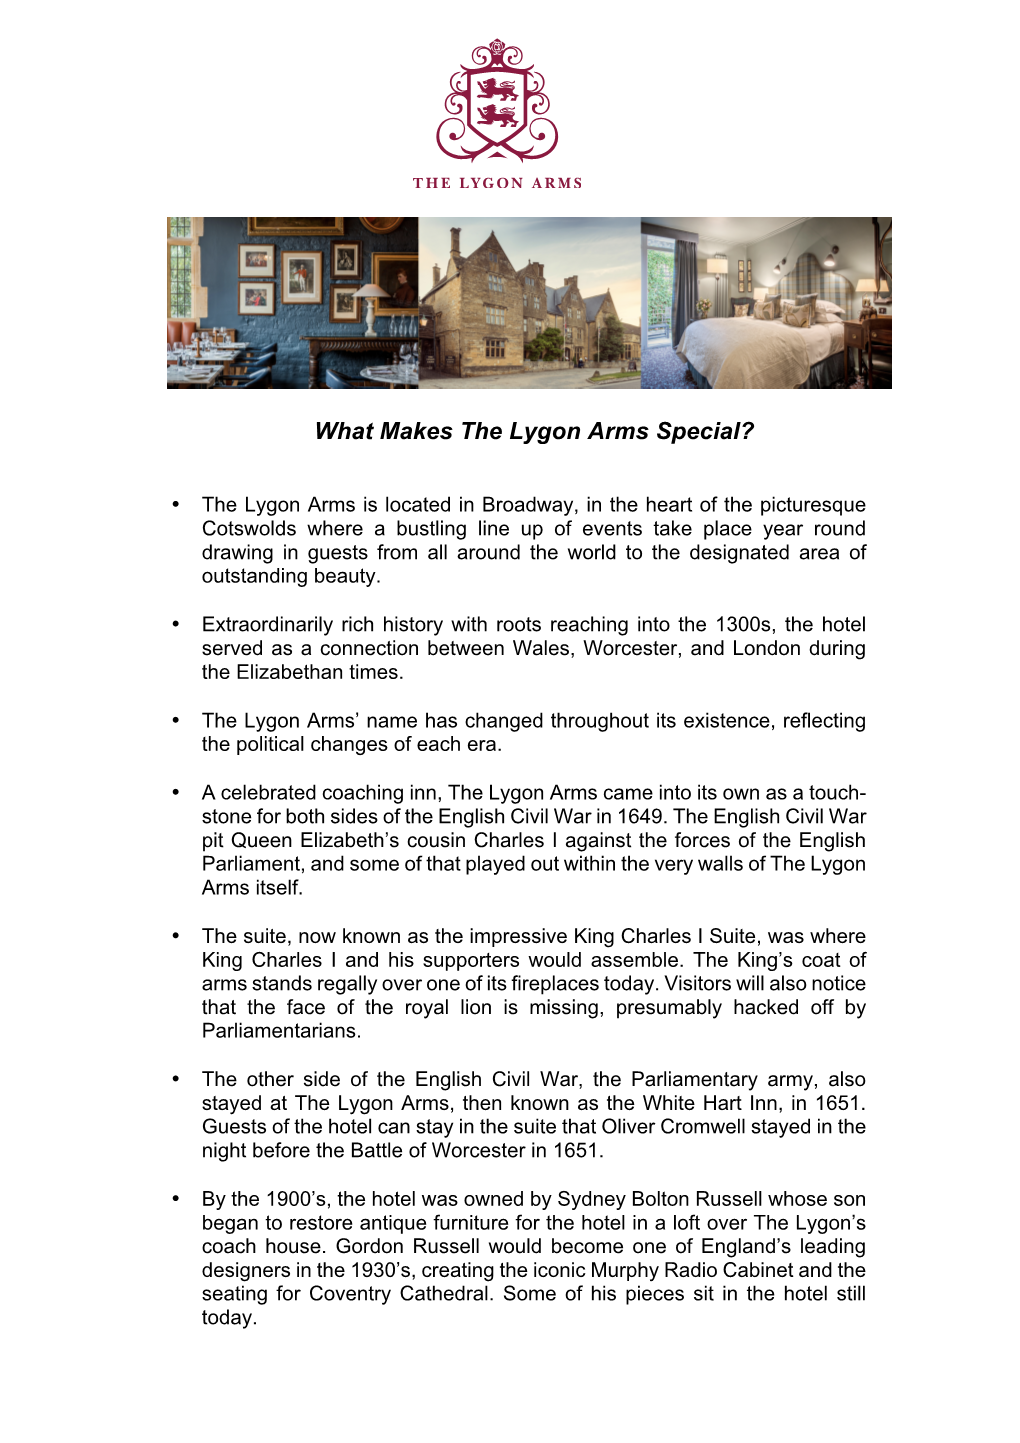 What Makes the Lygon Arms Special?